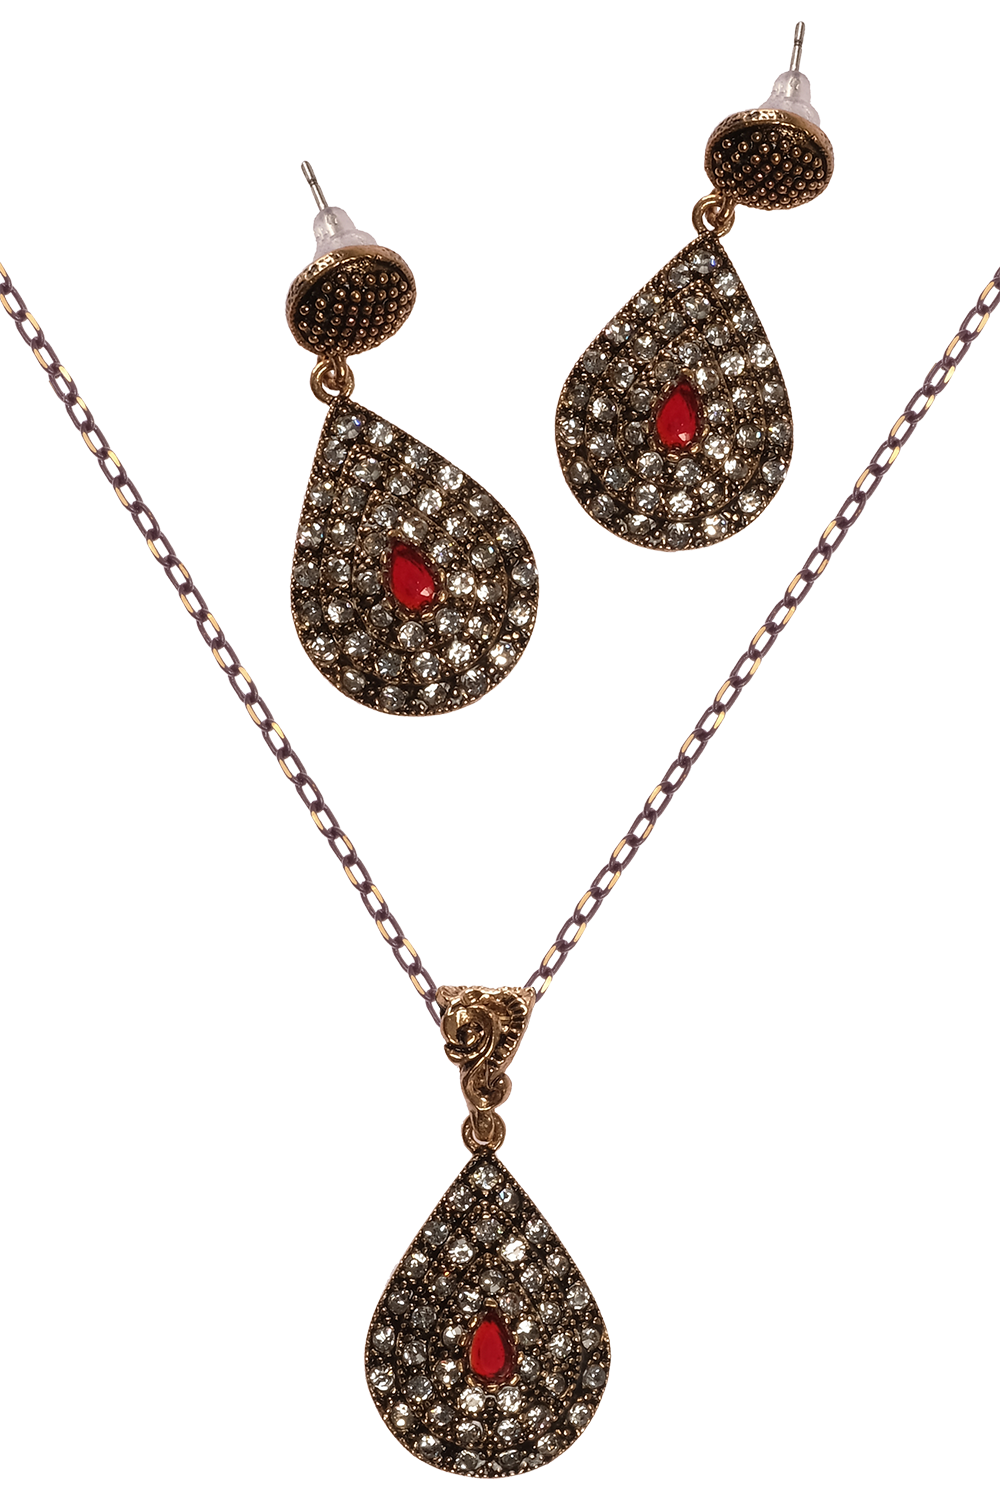 MEDOUSA Necklace and Earrings Jewelry Set